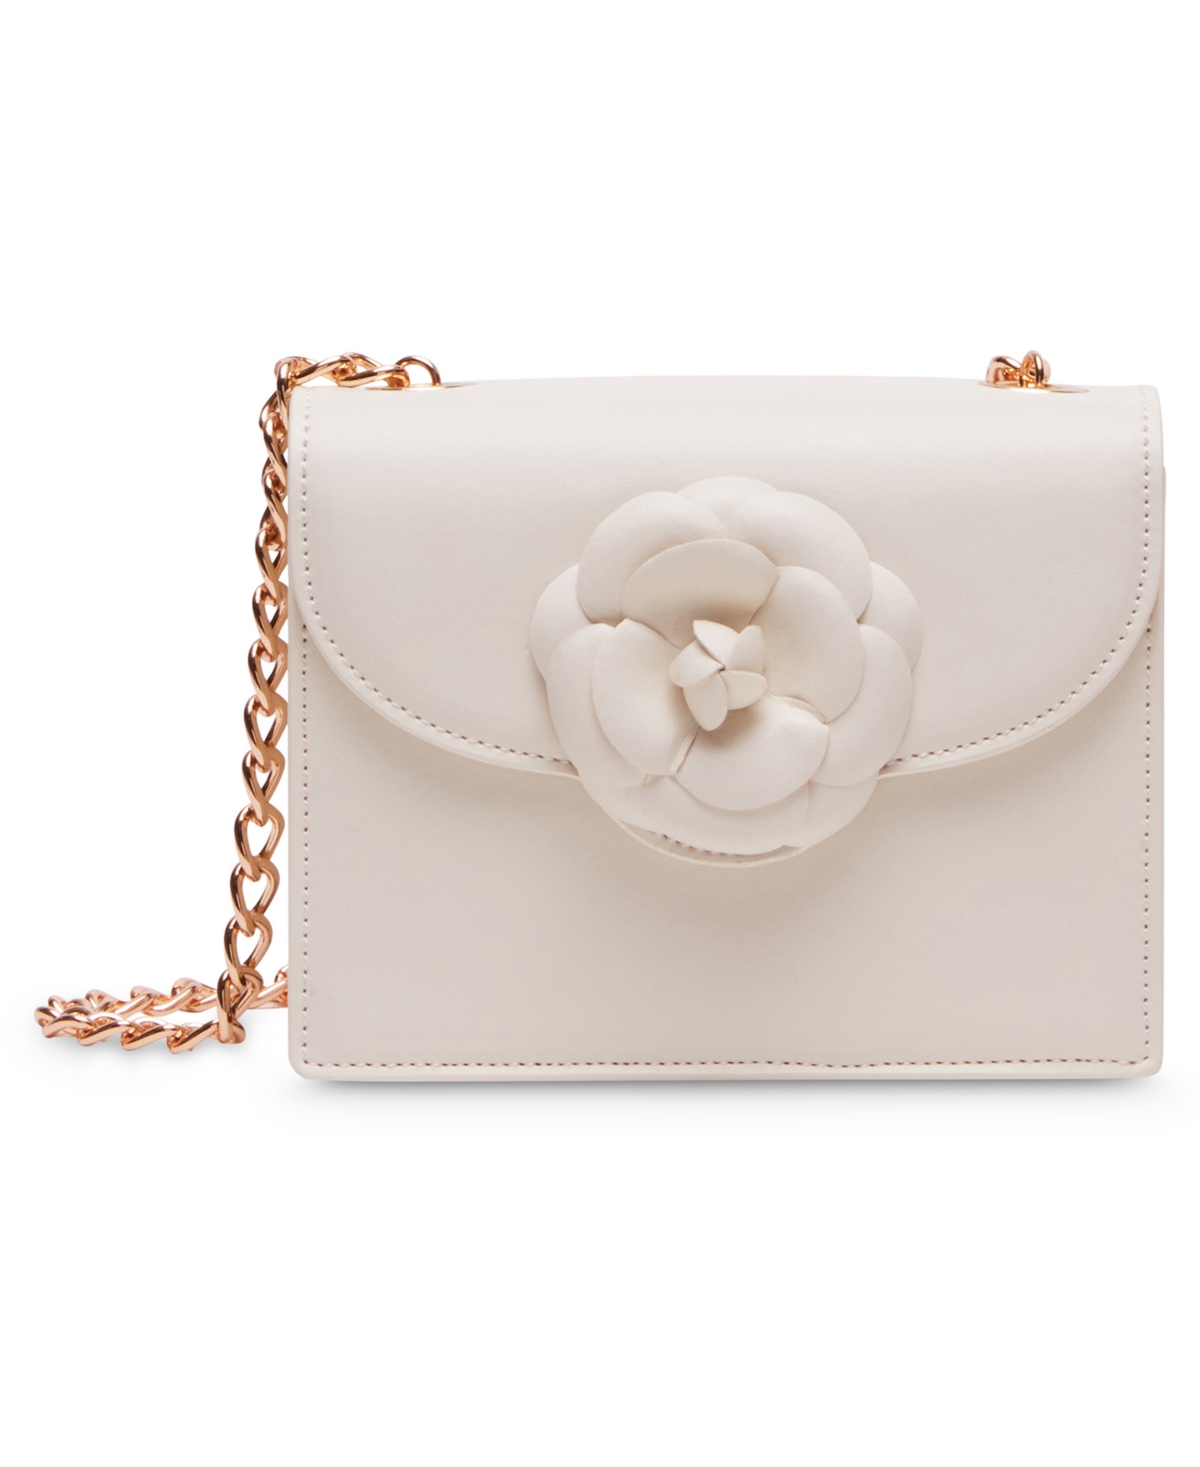 Anne Klein Square Flap With Floral Applique Crossbody In White